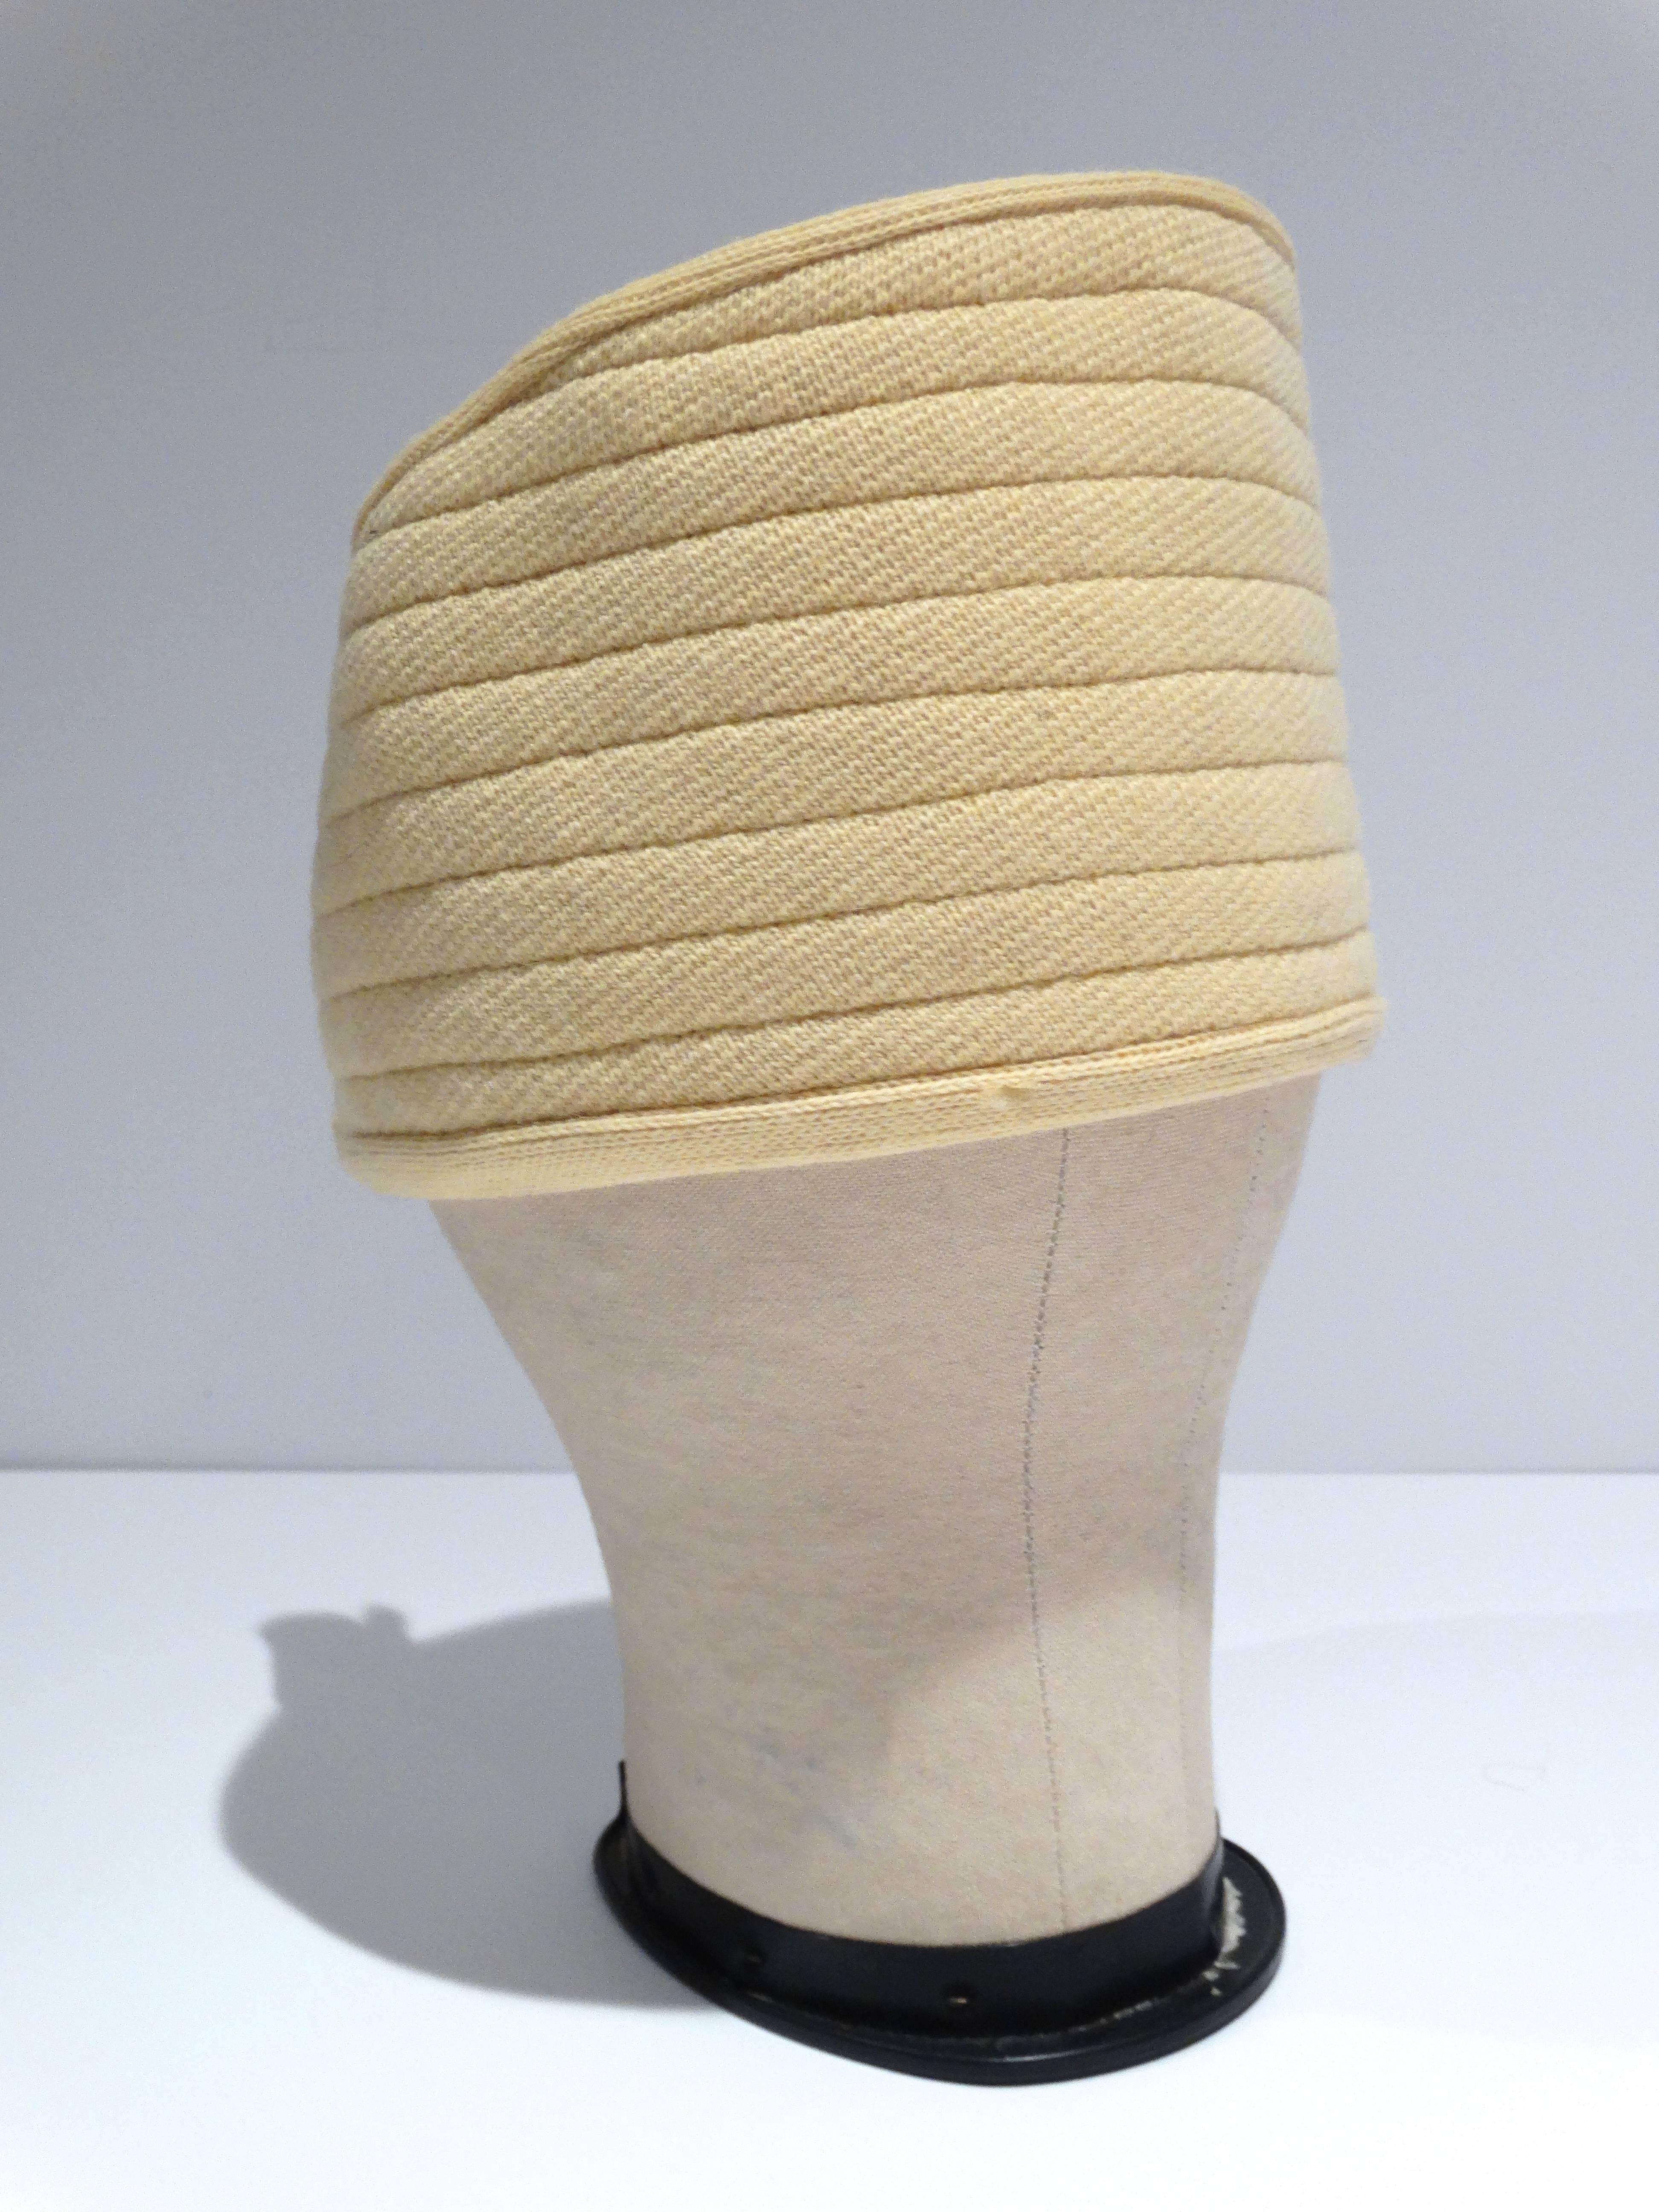 Rare 1973 Sonia Rykiel knit head band hat in a light champagne yellow. Exposed head reminds me of a crown, great style! In many ways I see Sonia Rykiel as a woman who shook the fashion world in no lesser way than Coco Chanel. It was Sonia who